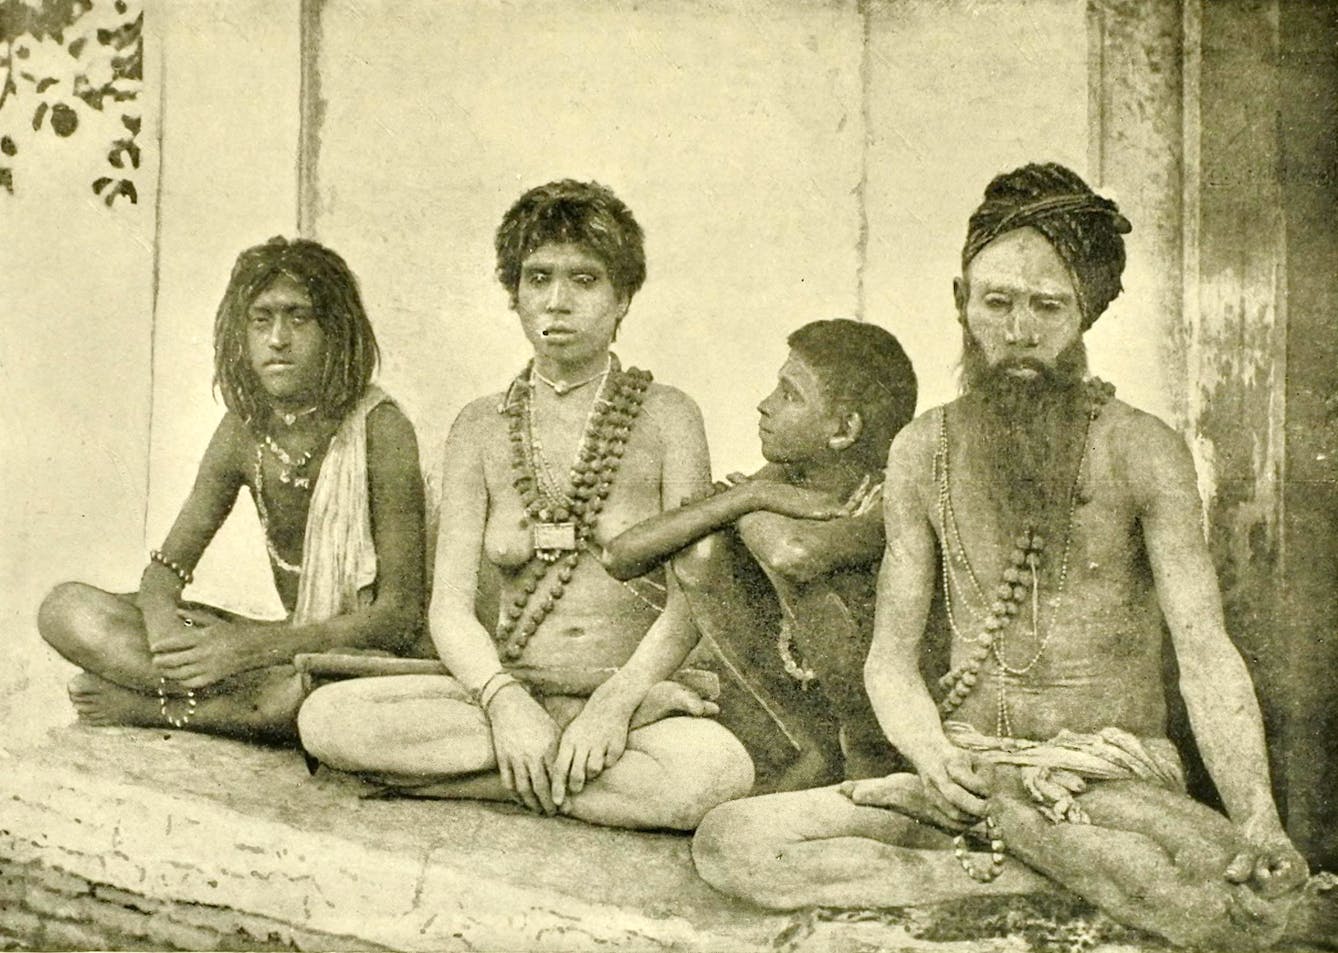 A group of male and female ascetics (sanyasis) in India